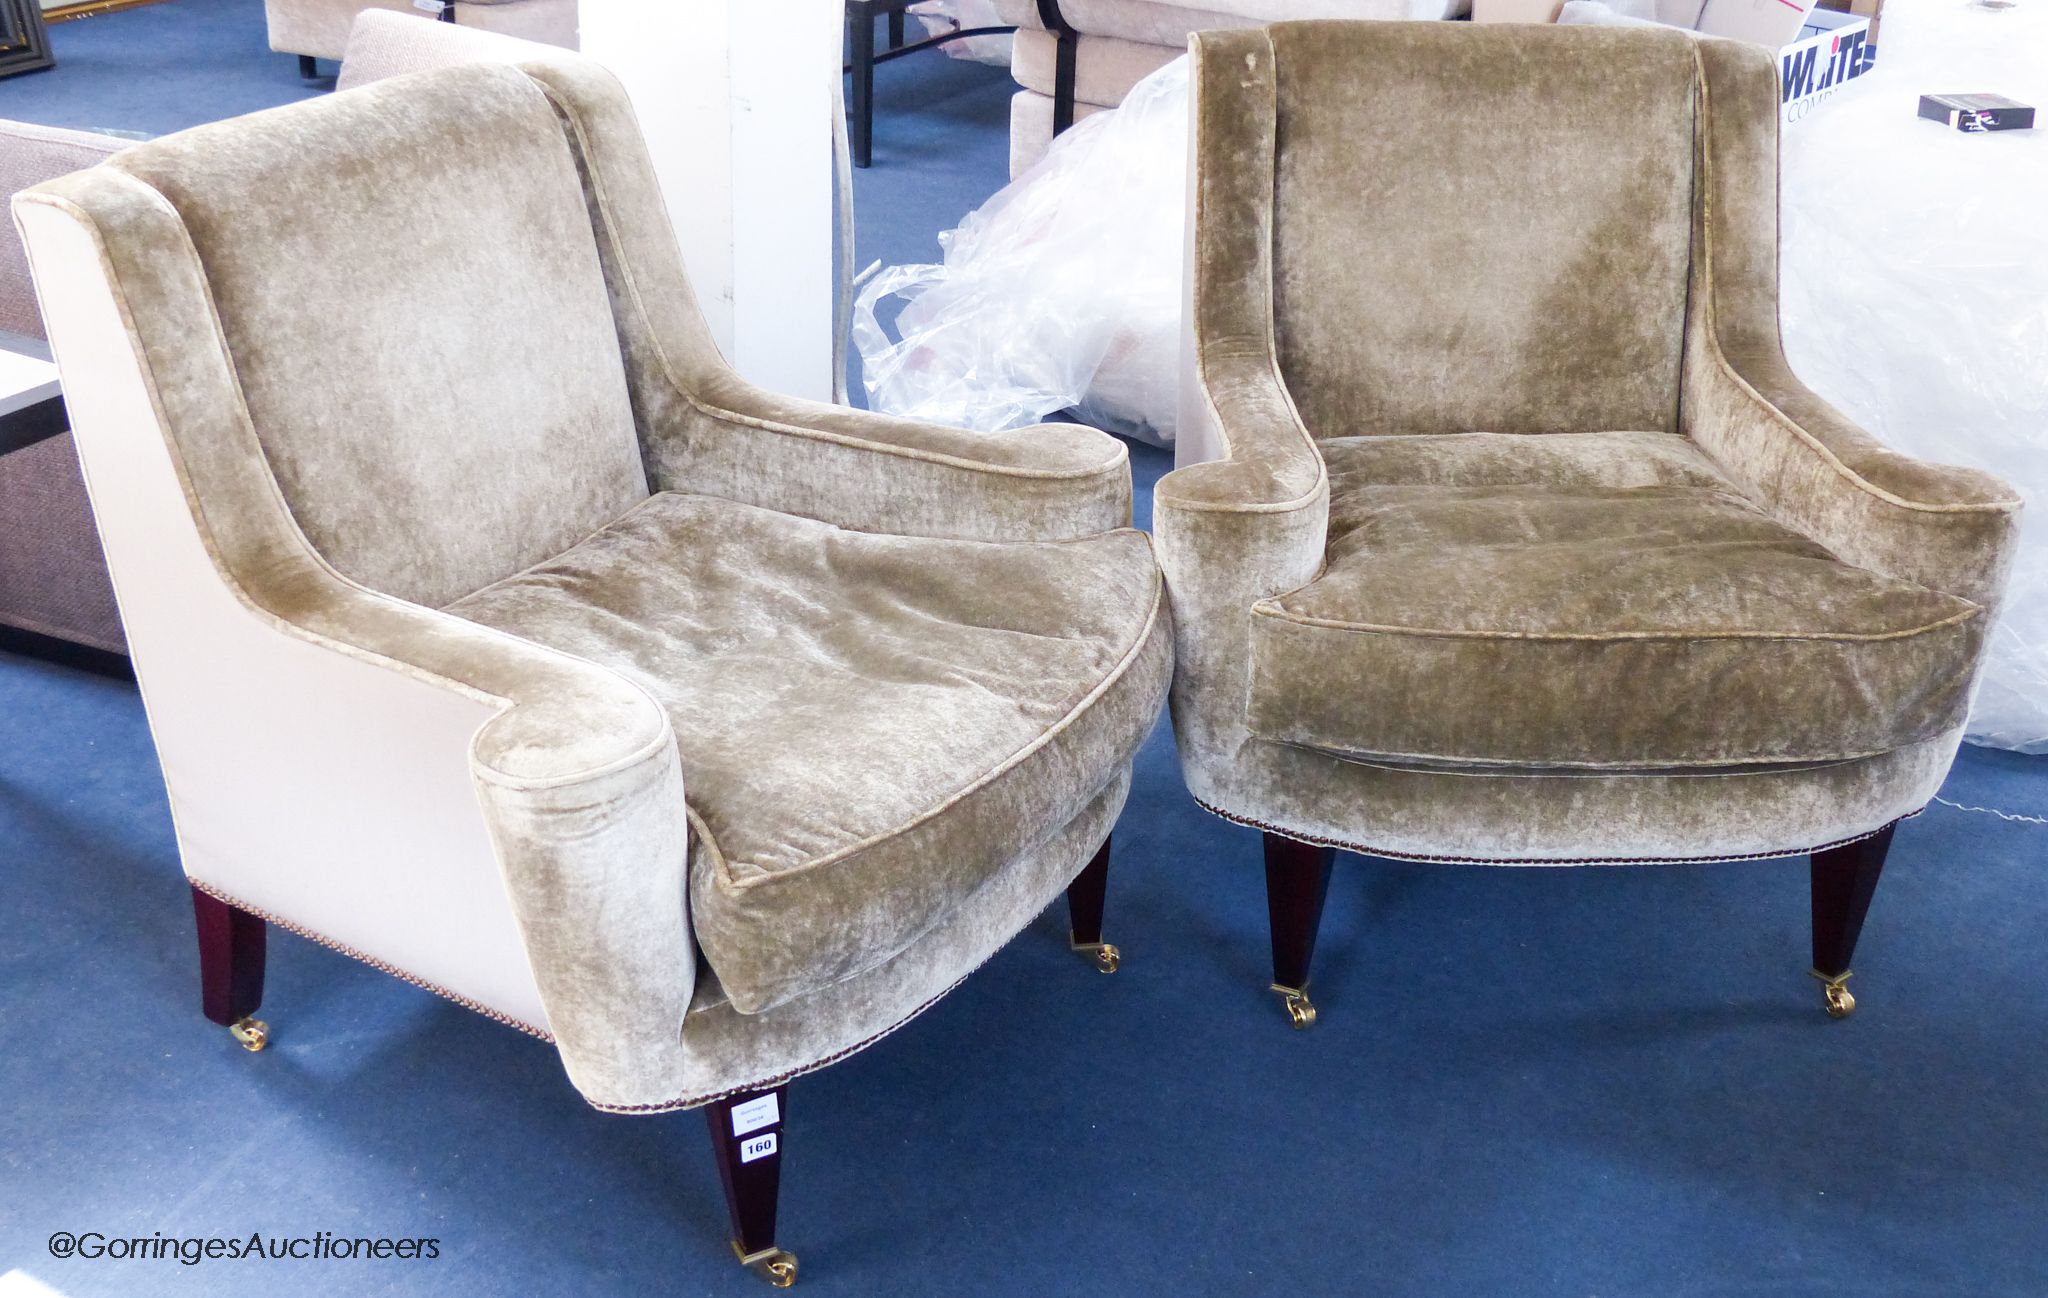 A pair of George III style pale grey velvet upholstery armchairs